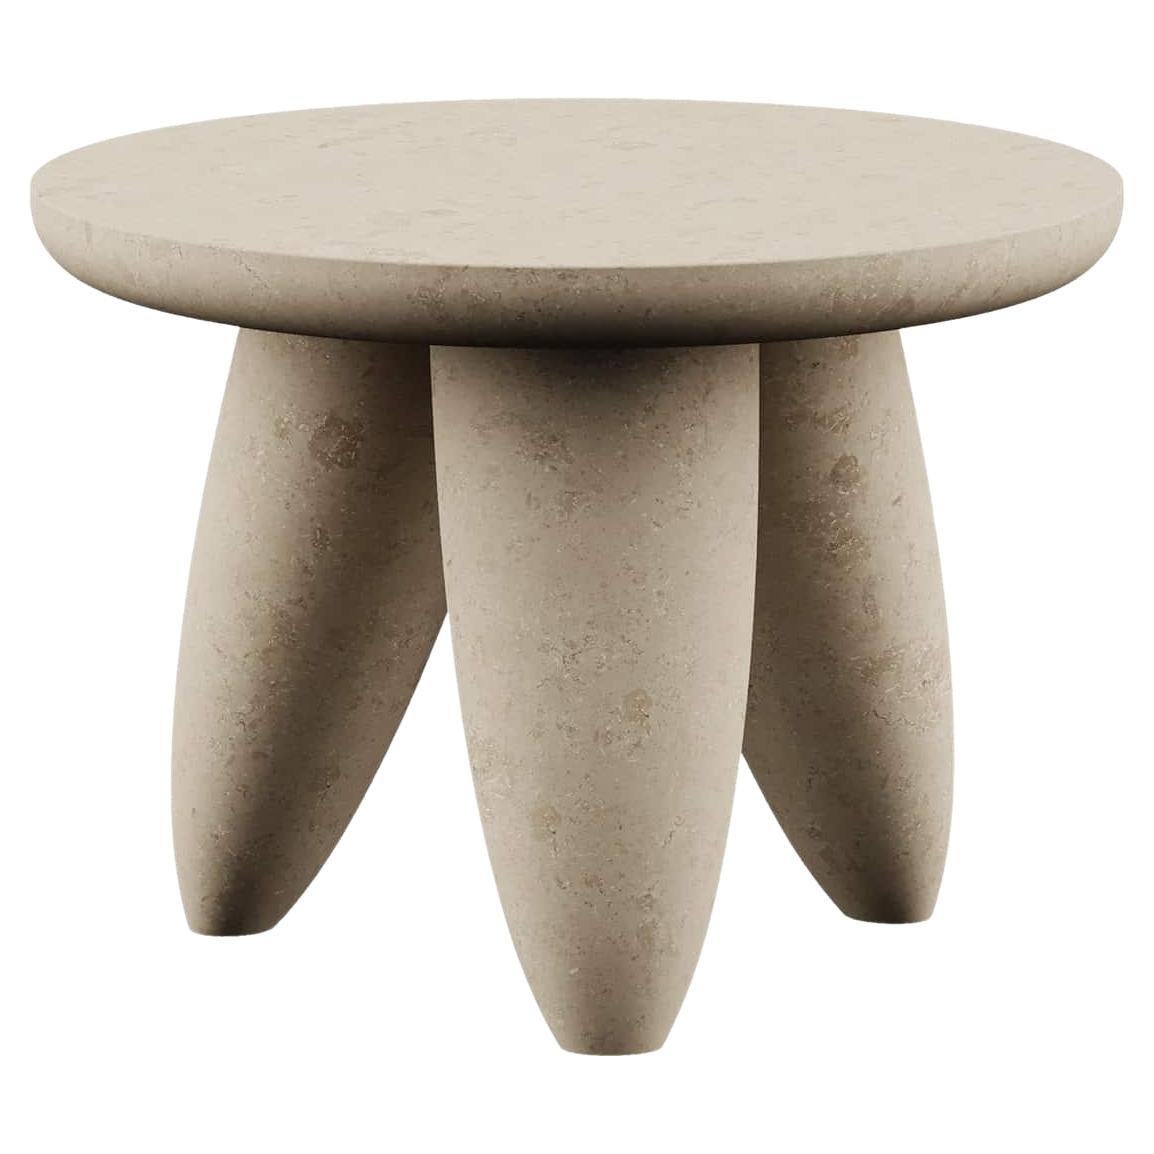 Contemporary Minimal Round Side Table 3 Legs in Natural Beige Limestone